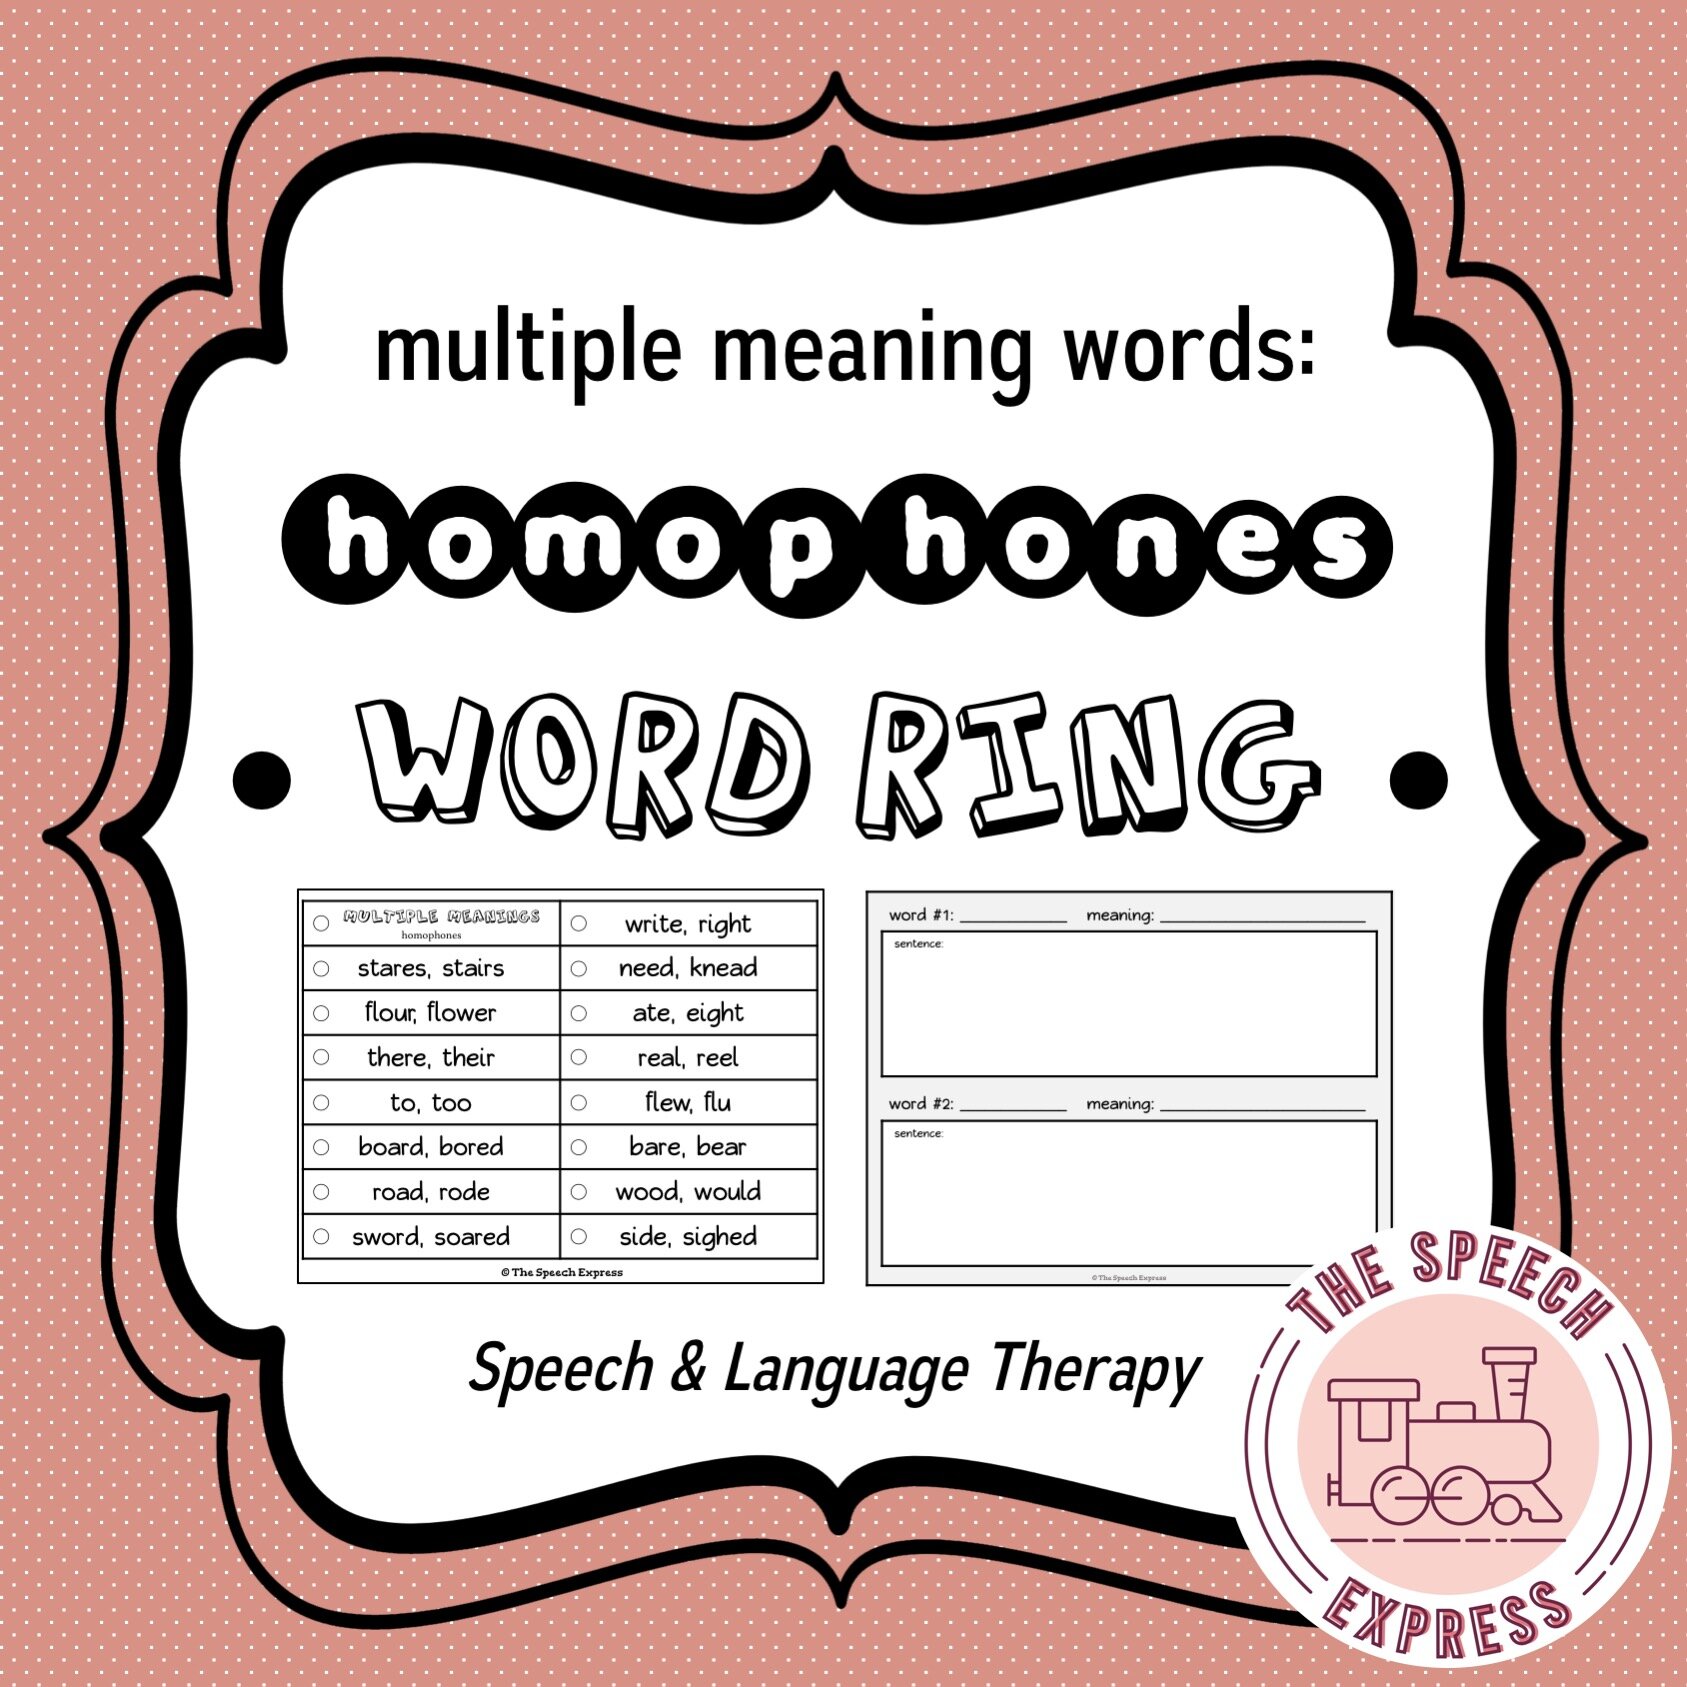 100 Most Common Homophones List - Lessons For English